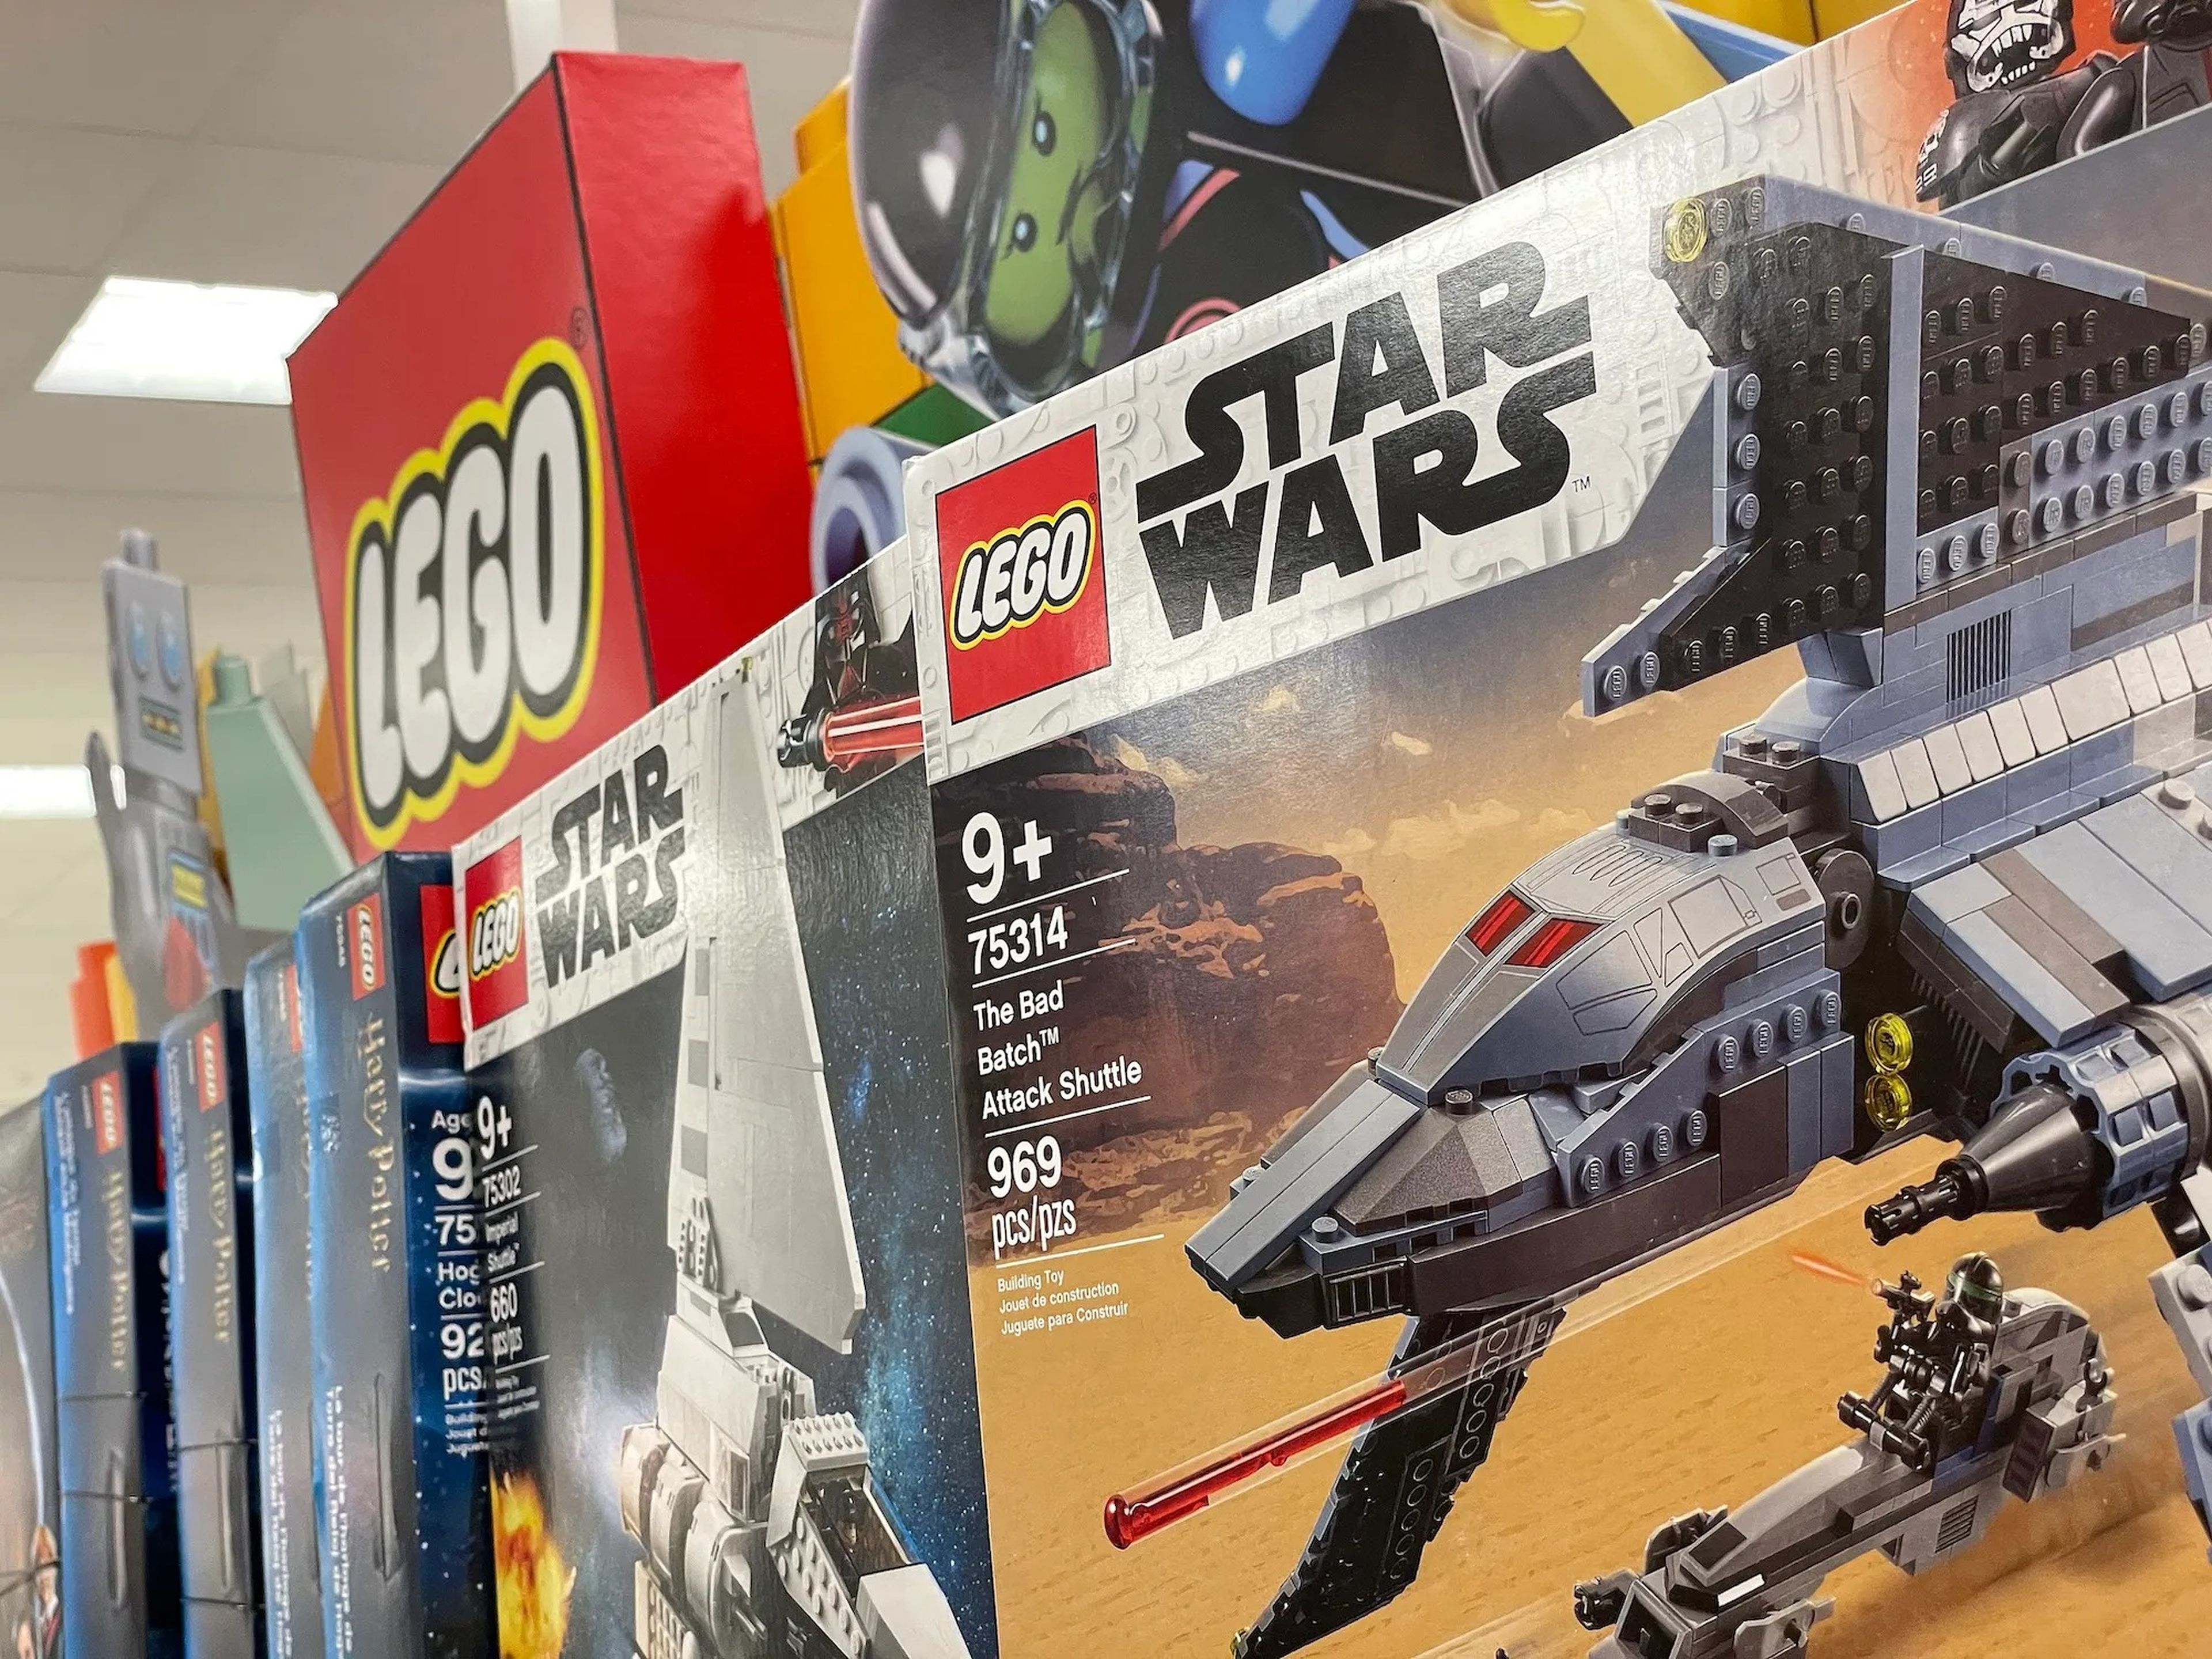 Boxes of Lego sets for sale on a store shelf.